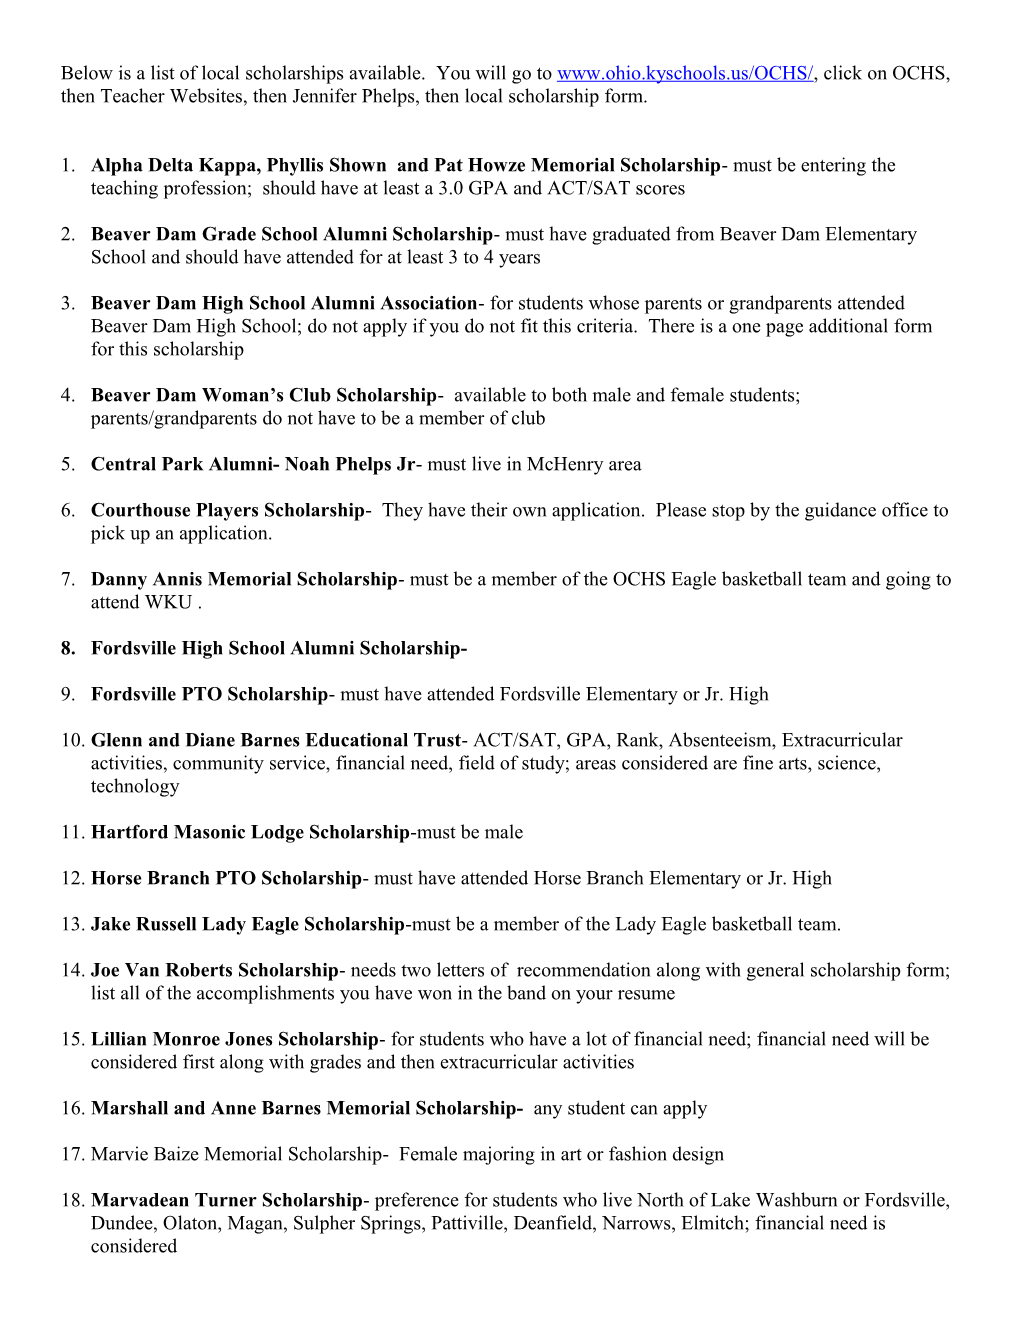 Below Is a List of Local Scholarships Available